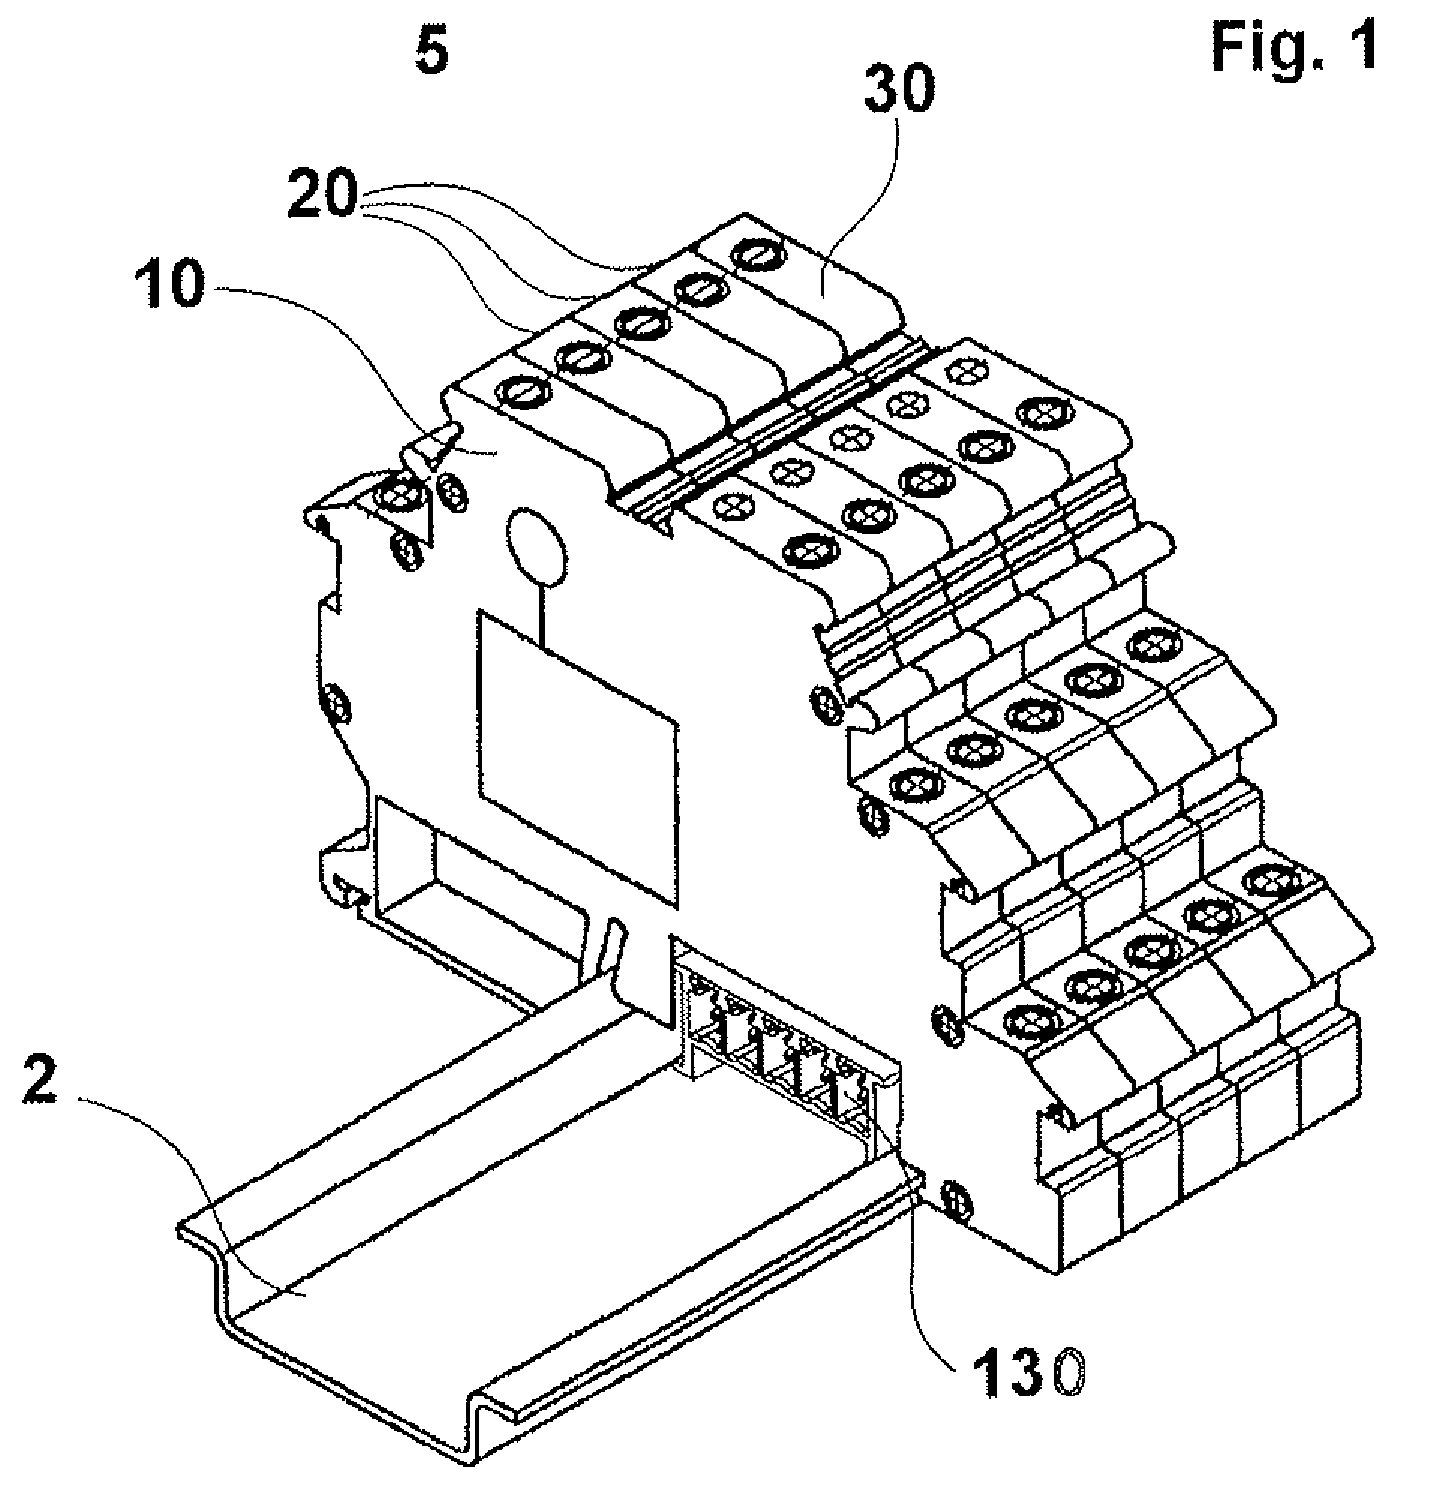 Modular data transmission system with separate energy supply for each connected module